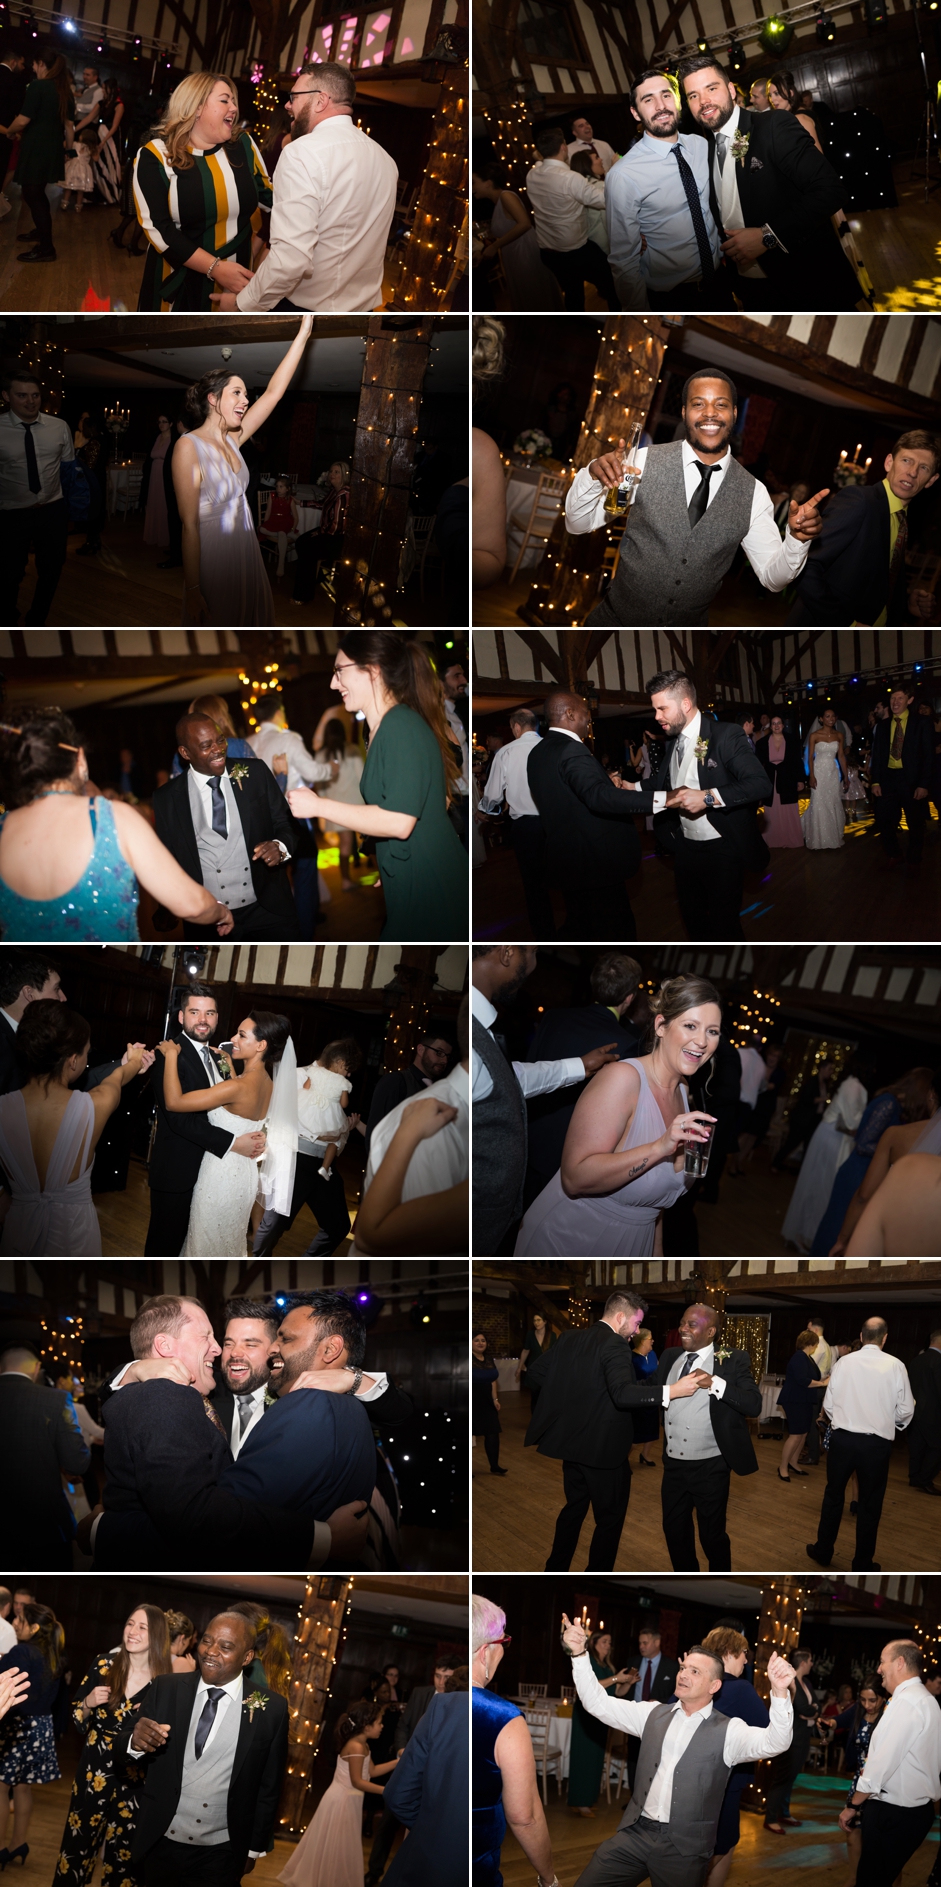 Great Fosters, Surrey, Wedding Photography